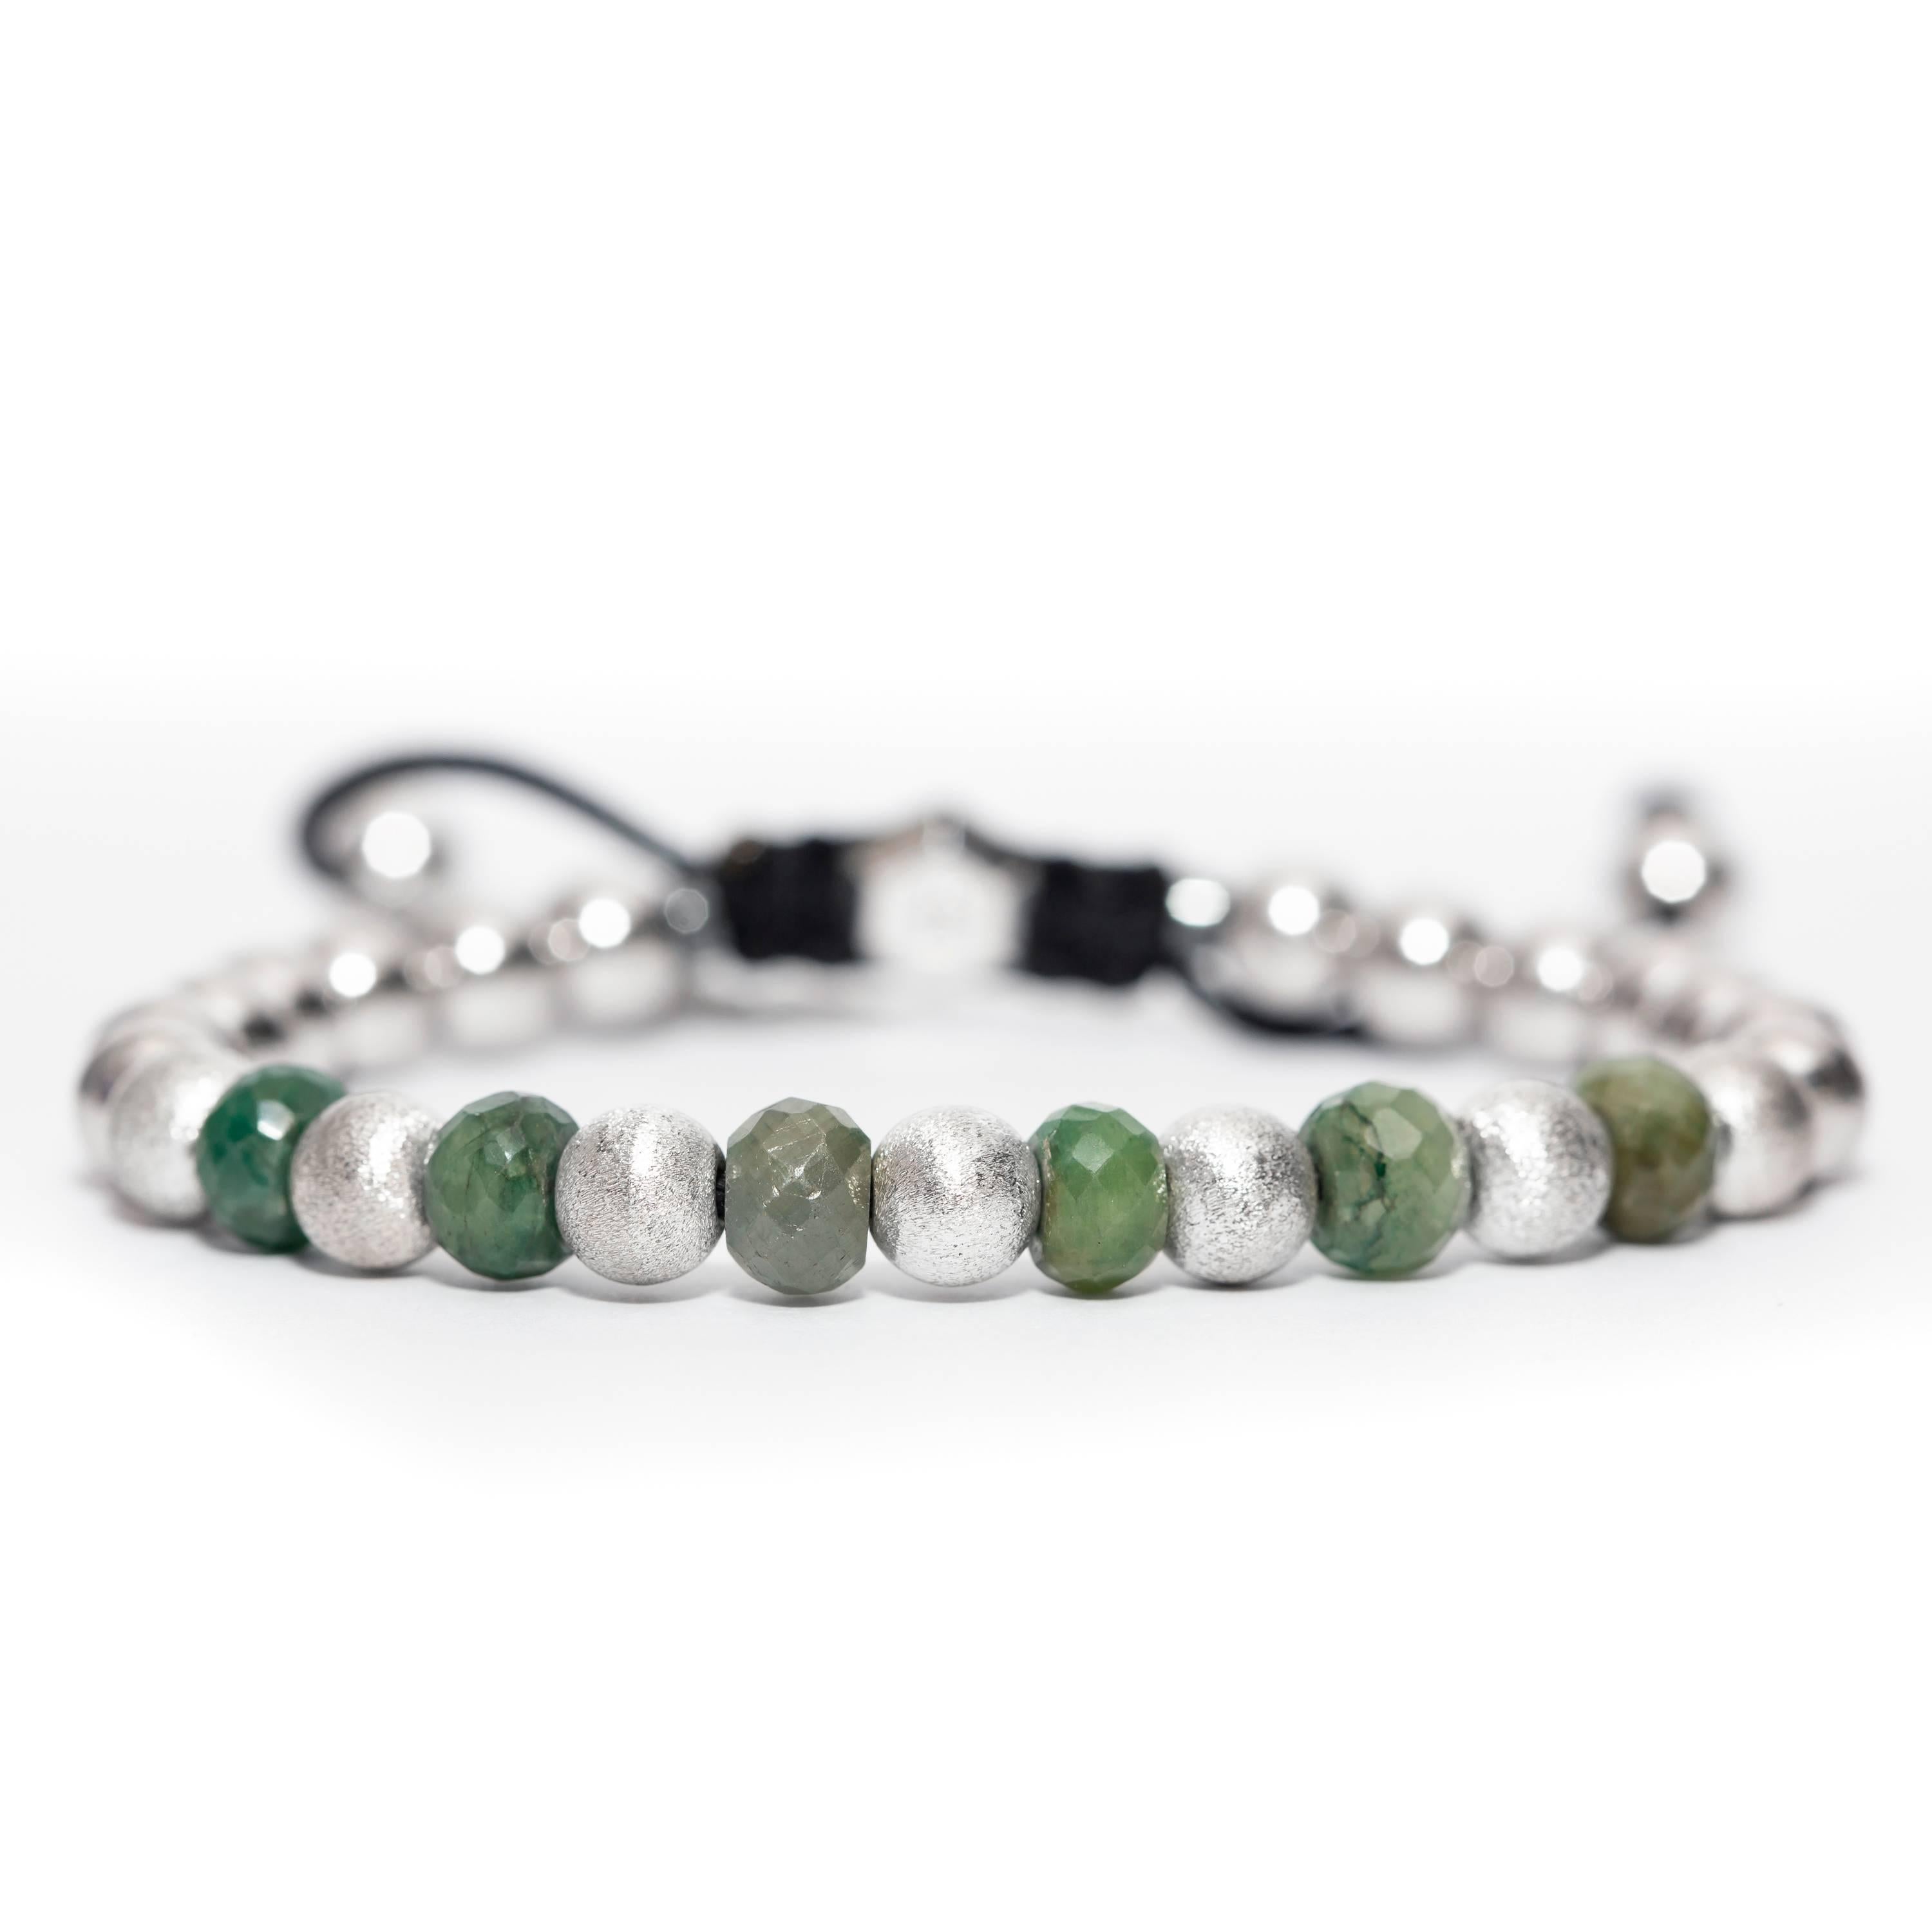 This 11.76 Carats Emerald Stainless Steel and Silver beaded bracelet from The Original Tresor Paris Tendresse Vert Collection. This Bracelet features 7 satin finished beads and 14 shiny Stainless Steel beads and two magnetite rings with a Silver